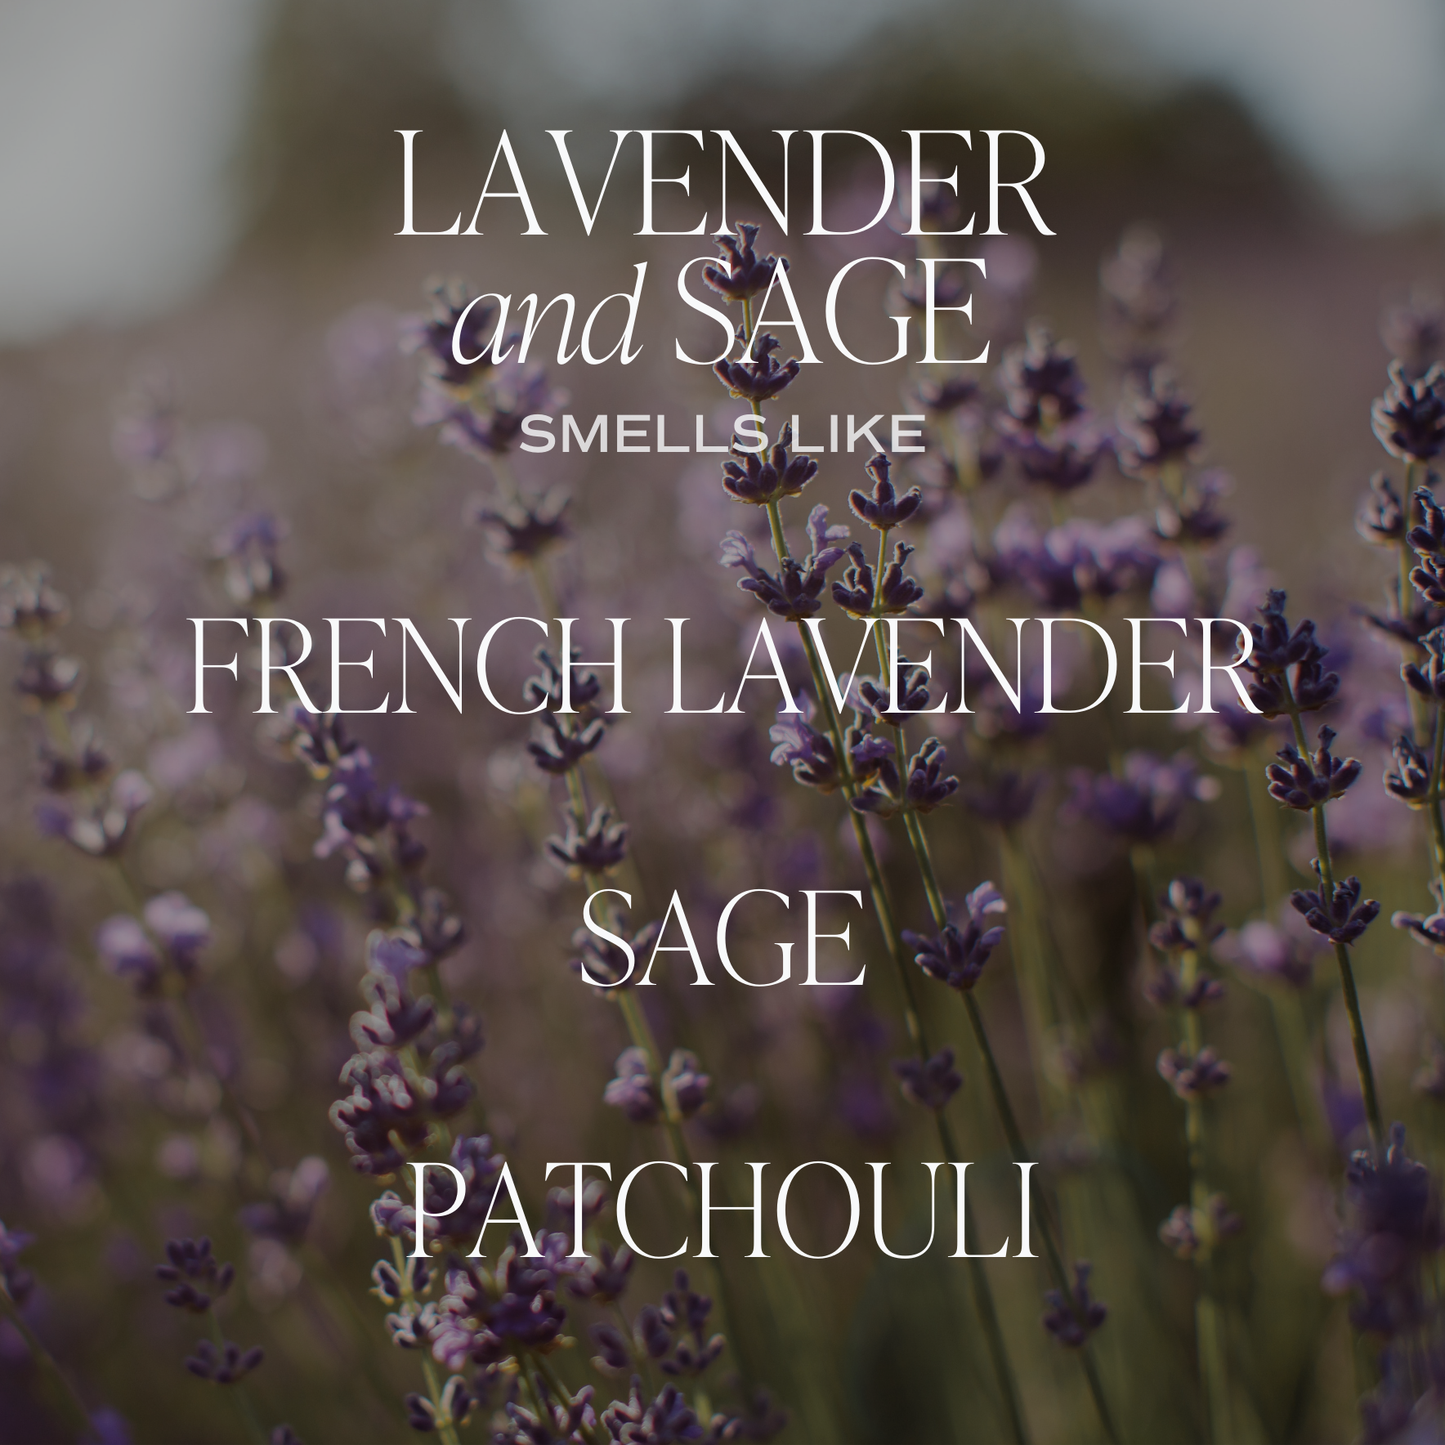 Sweet Water Decor - Lavender and Sage Reed Diffuser - Gifts & Home Decor